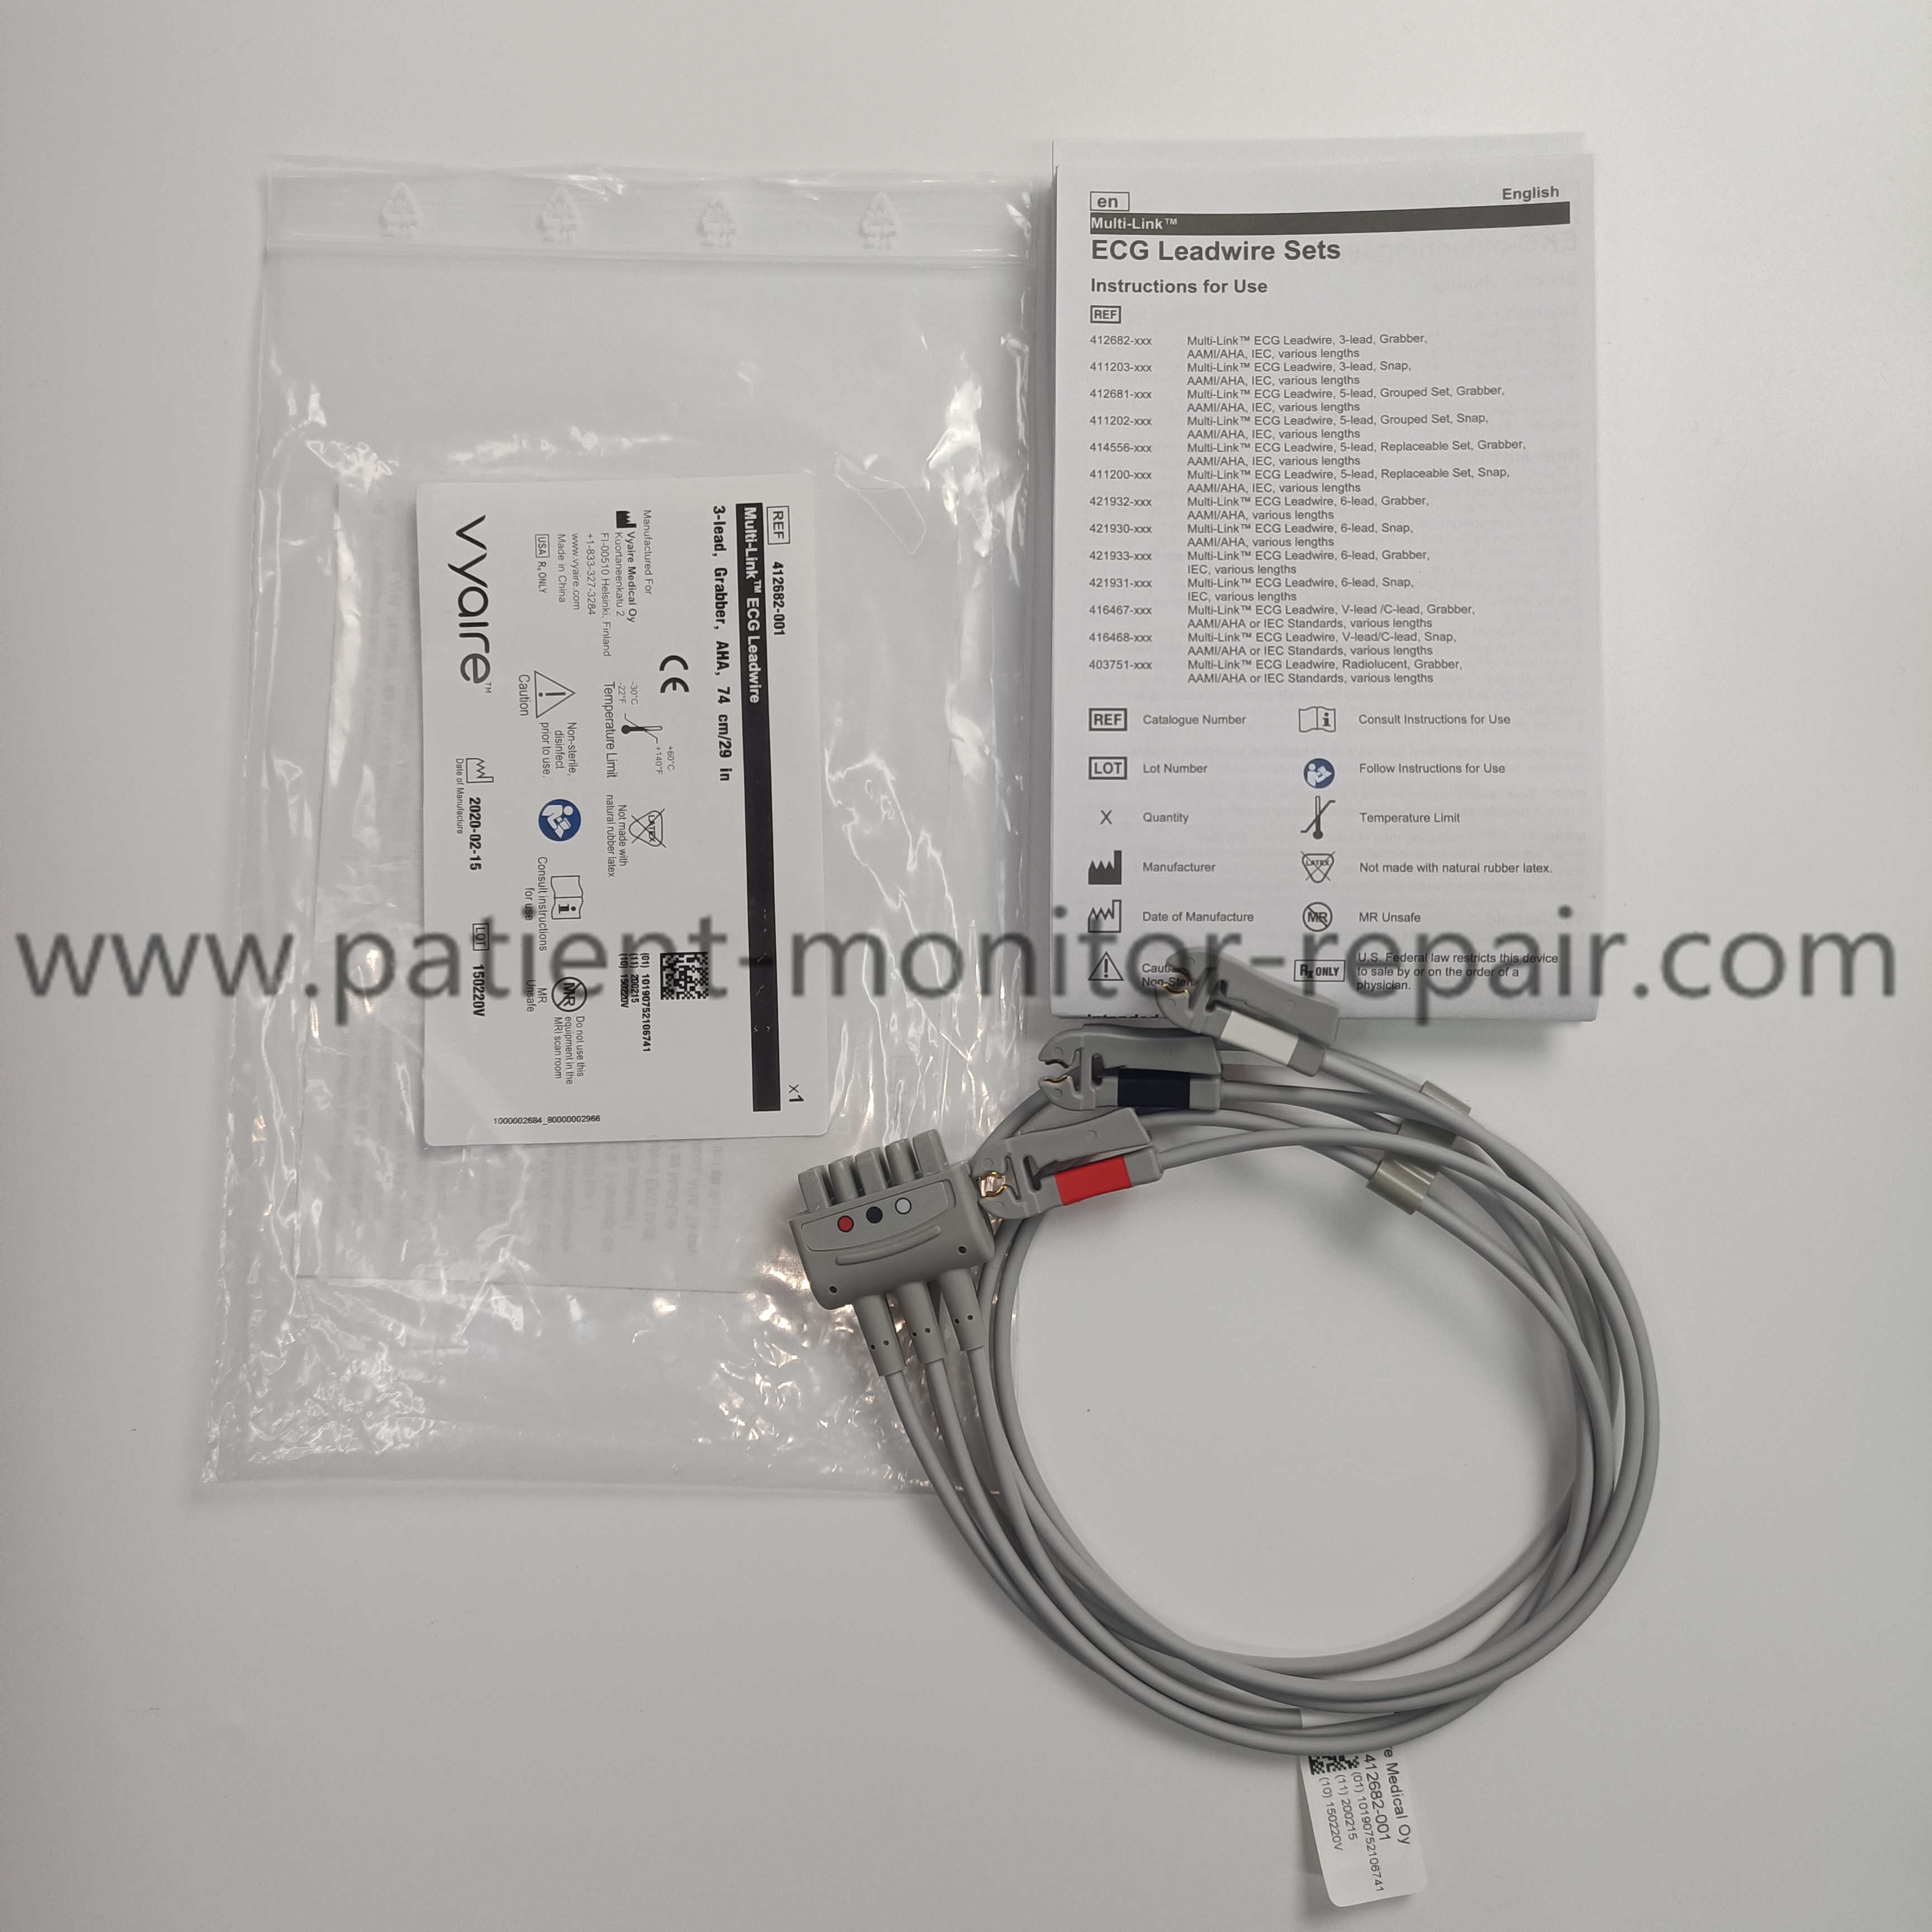 GE Vyaire 412682-001 Multi-Link ECG Leadwire Cable 3-Lead, Grabber, AHA, 74cm(29in) 